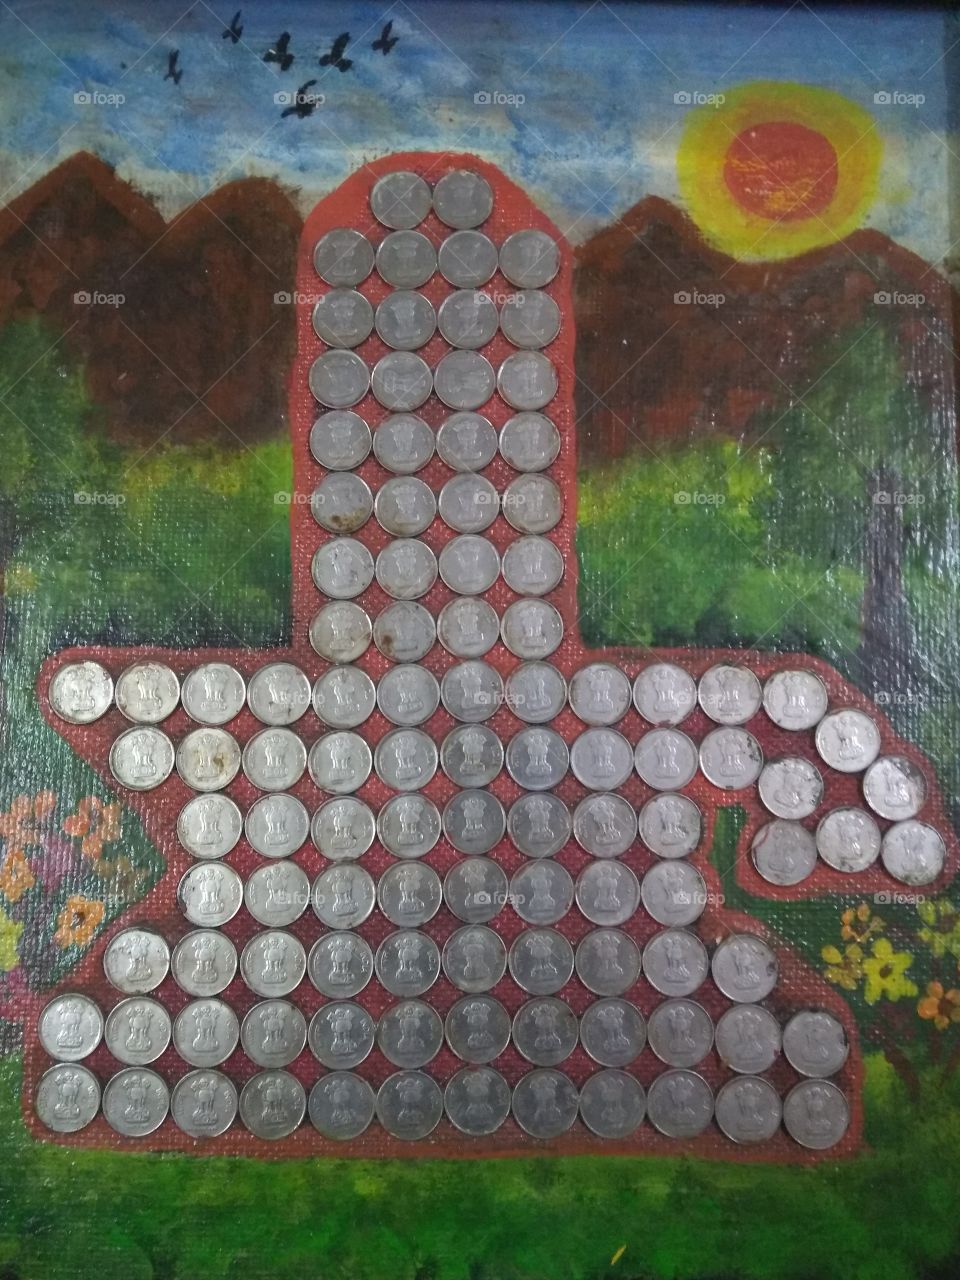 Lord shiva made up of 10 paise coins